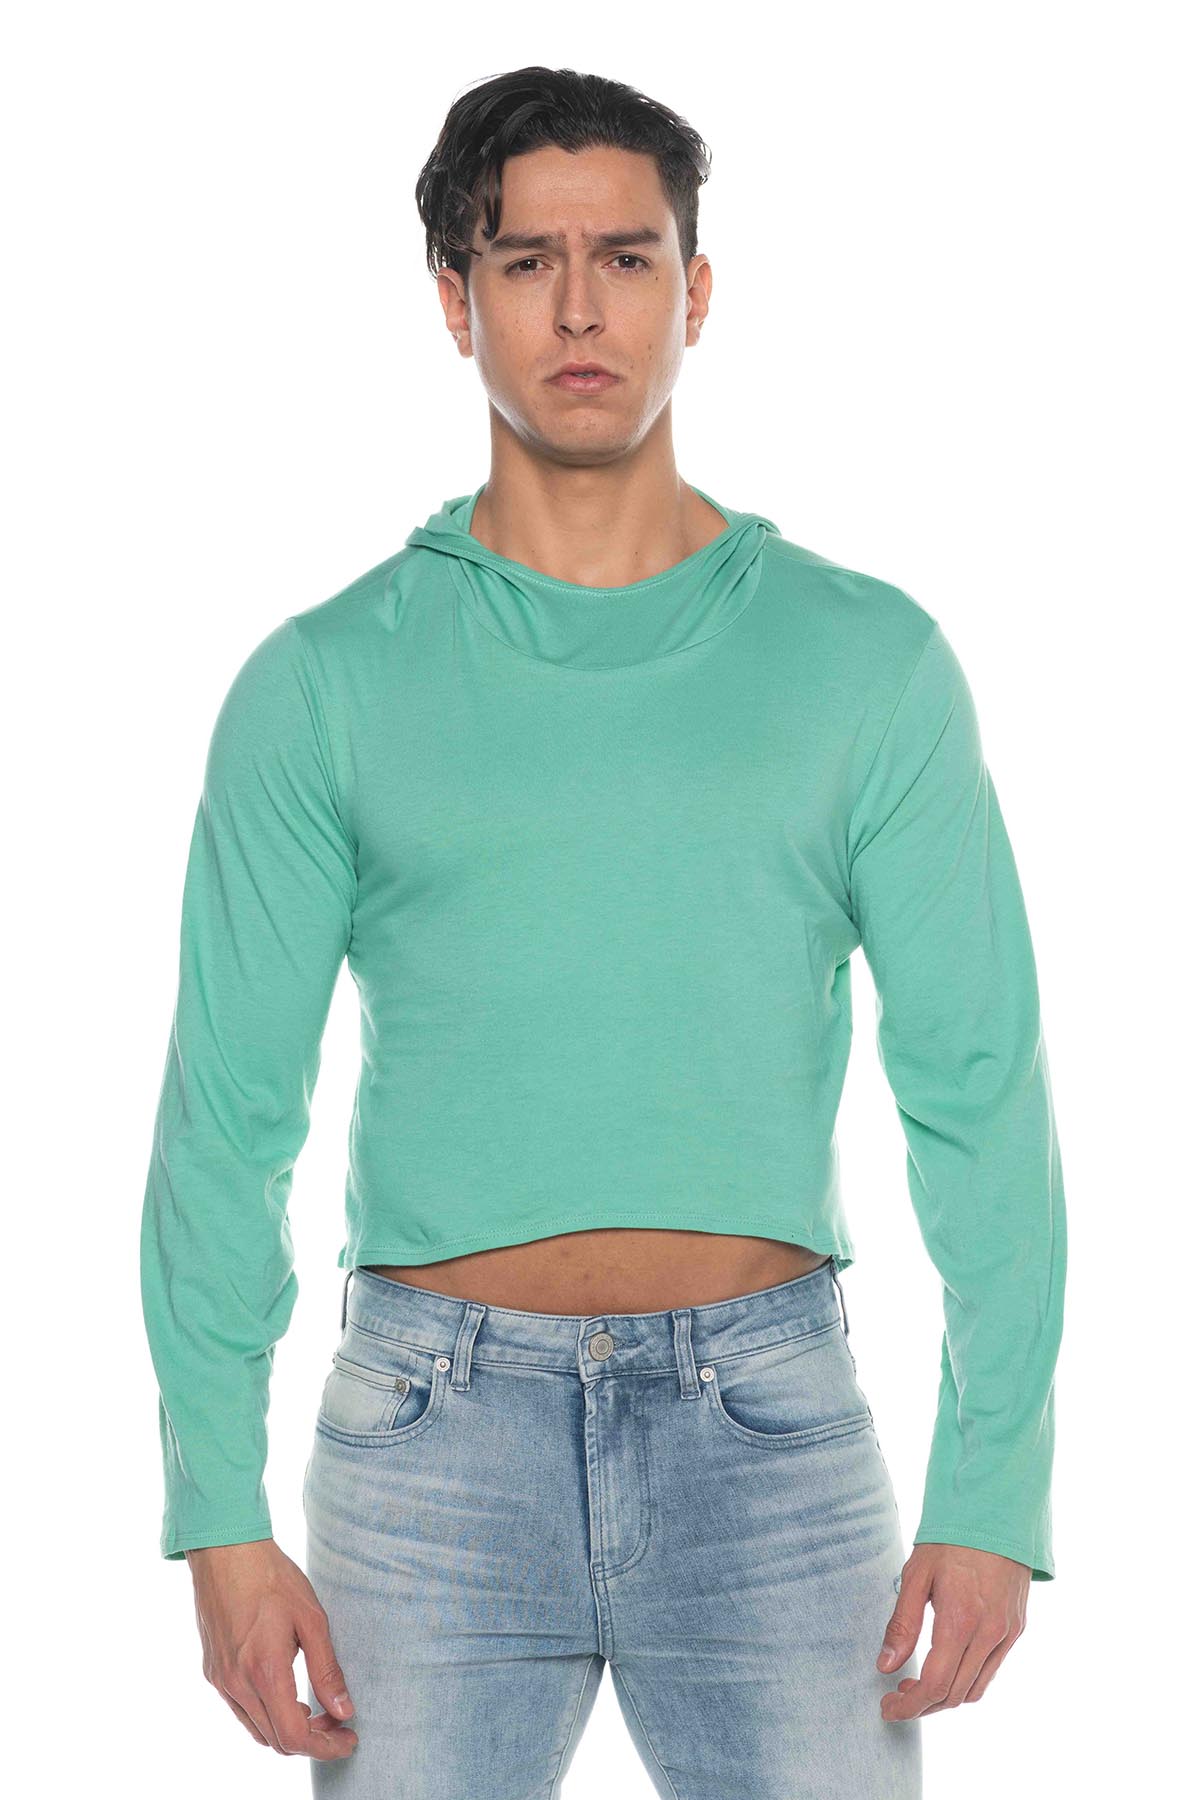 Go Softwear Pacific Lite Weight Pull-Over Hoody, Spearmint